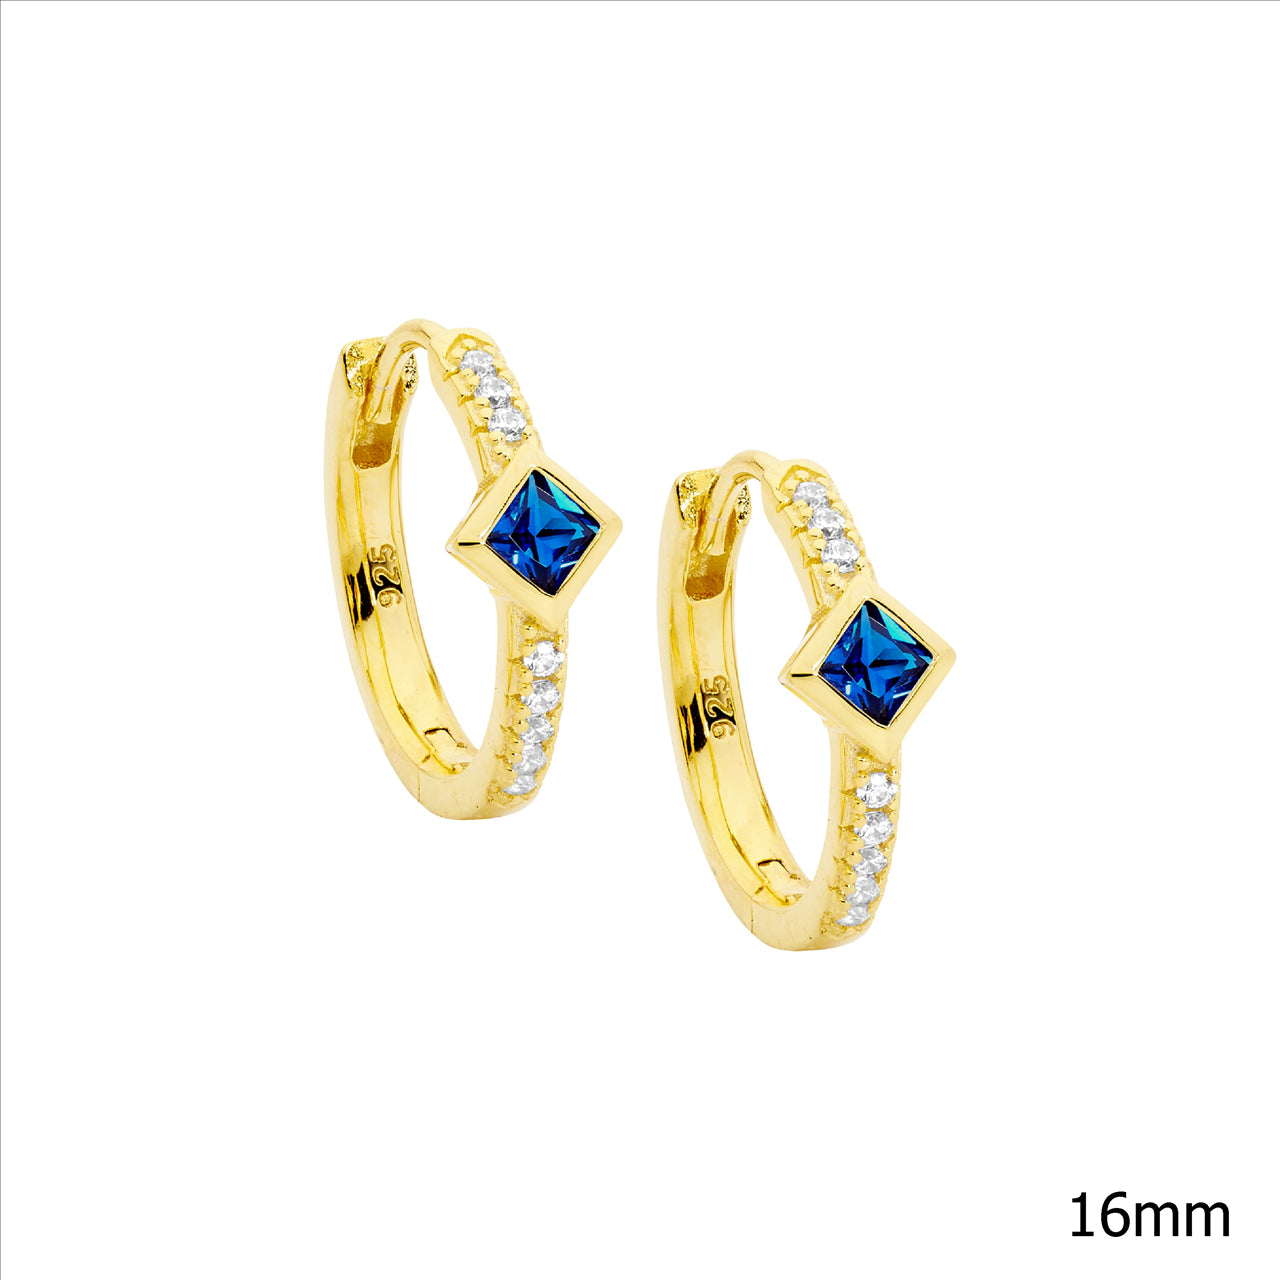 Ellani Sterling Silver & Cubic Zirconia Gold Plated Hoop Earrings With Blue Centre Stone